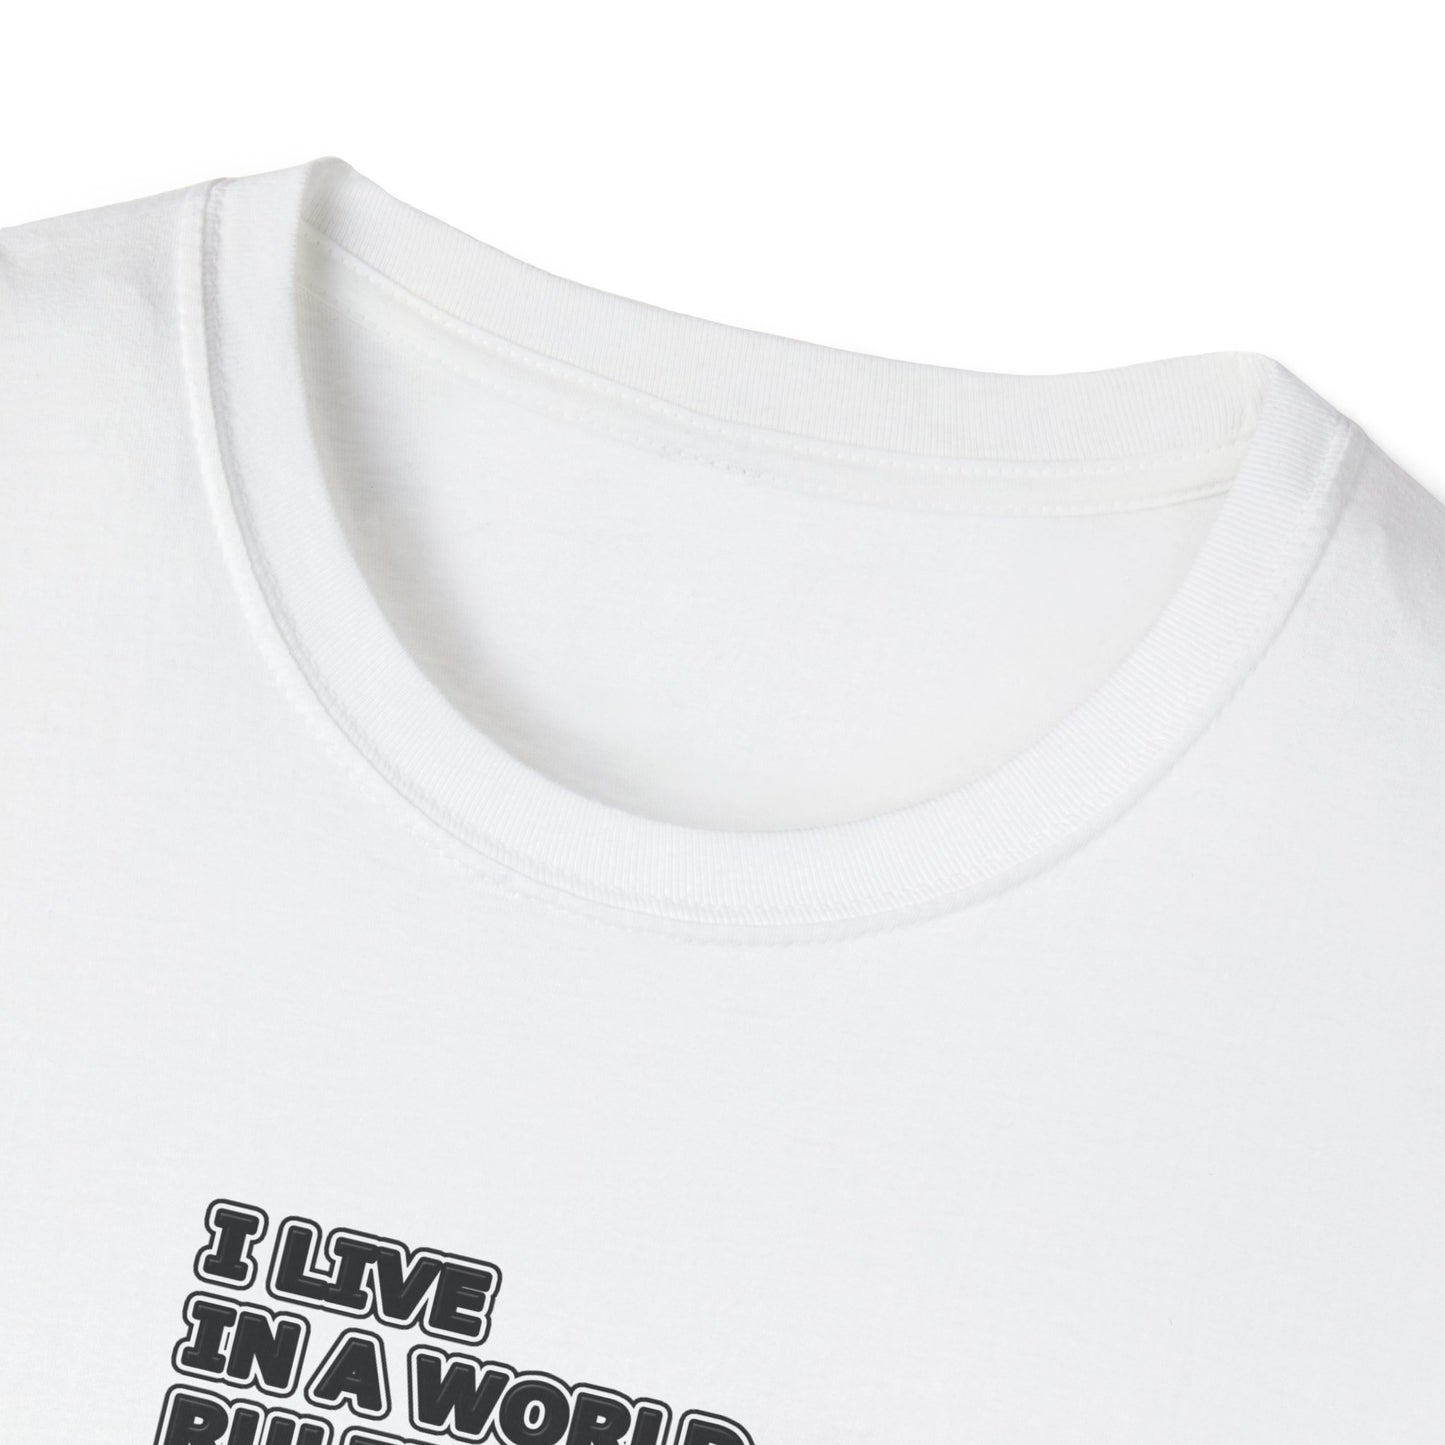 "I live in a world ruled by corporations" by Tin Foil Wear